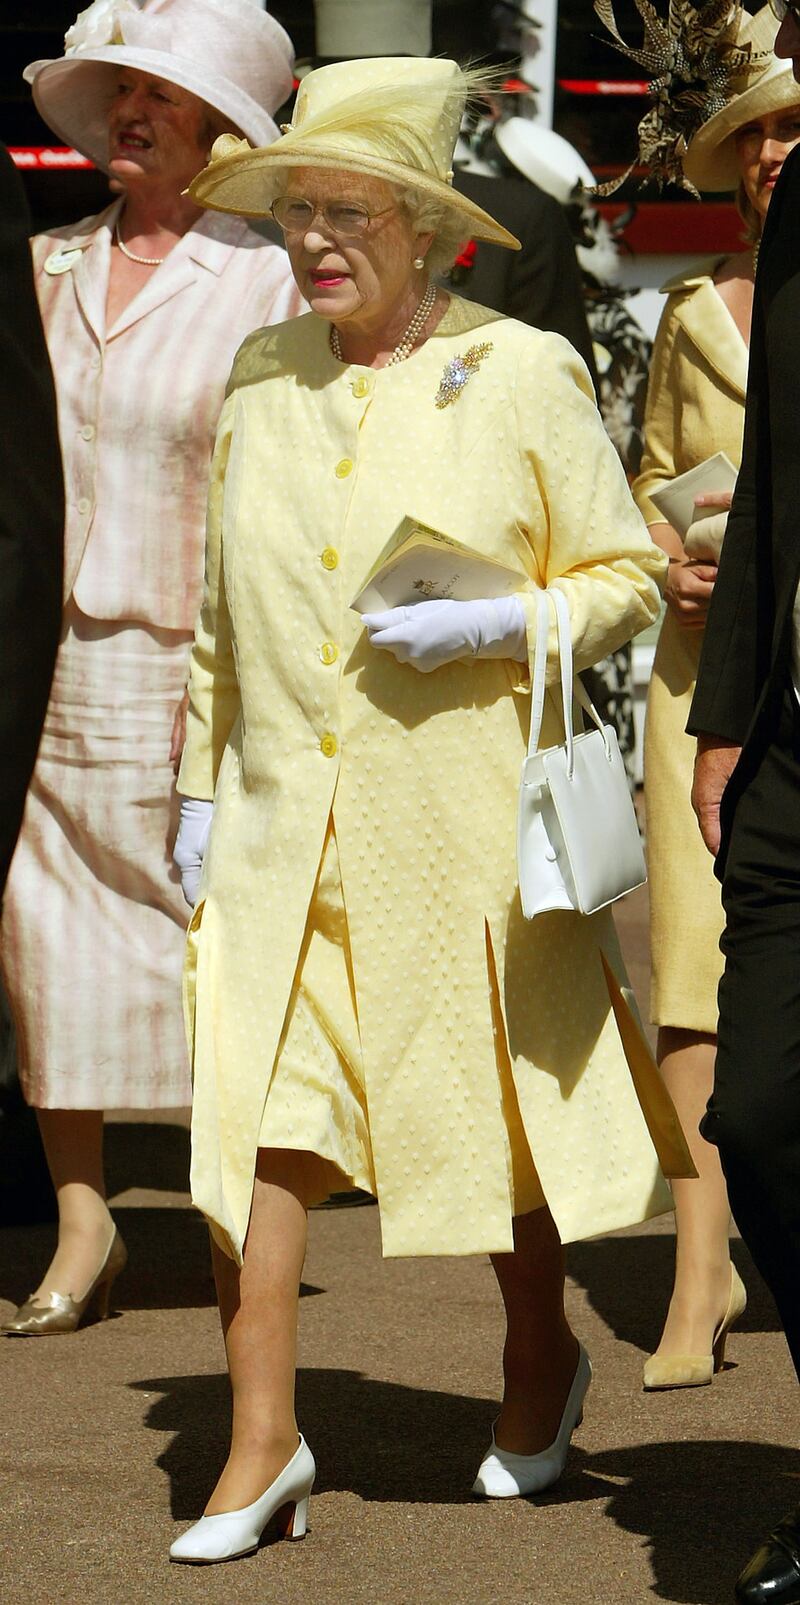 Queen Elizabeth II, wearing yellow, attends the first day of Royal Ascot on June 15, 2004, in Berkshire, England. Getty Images